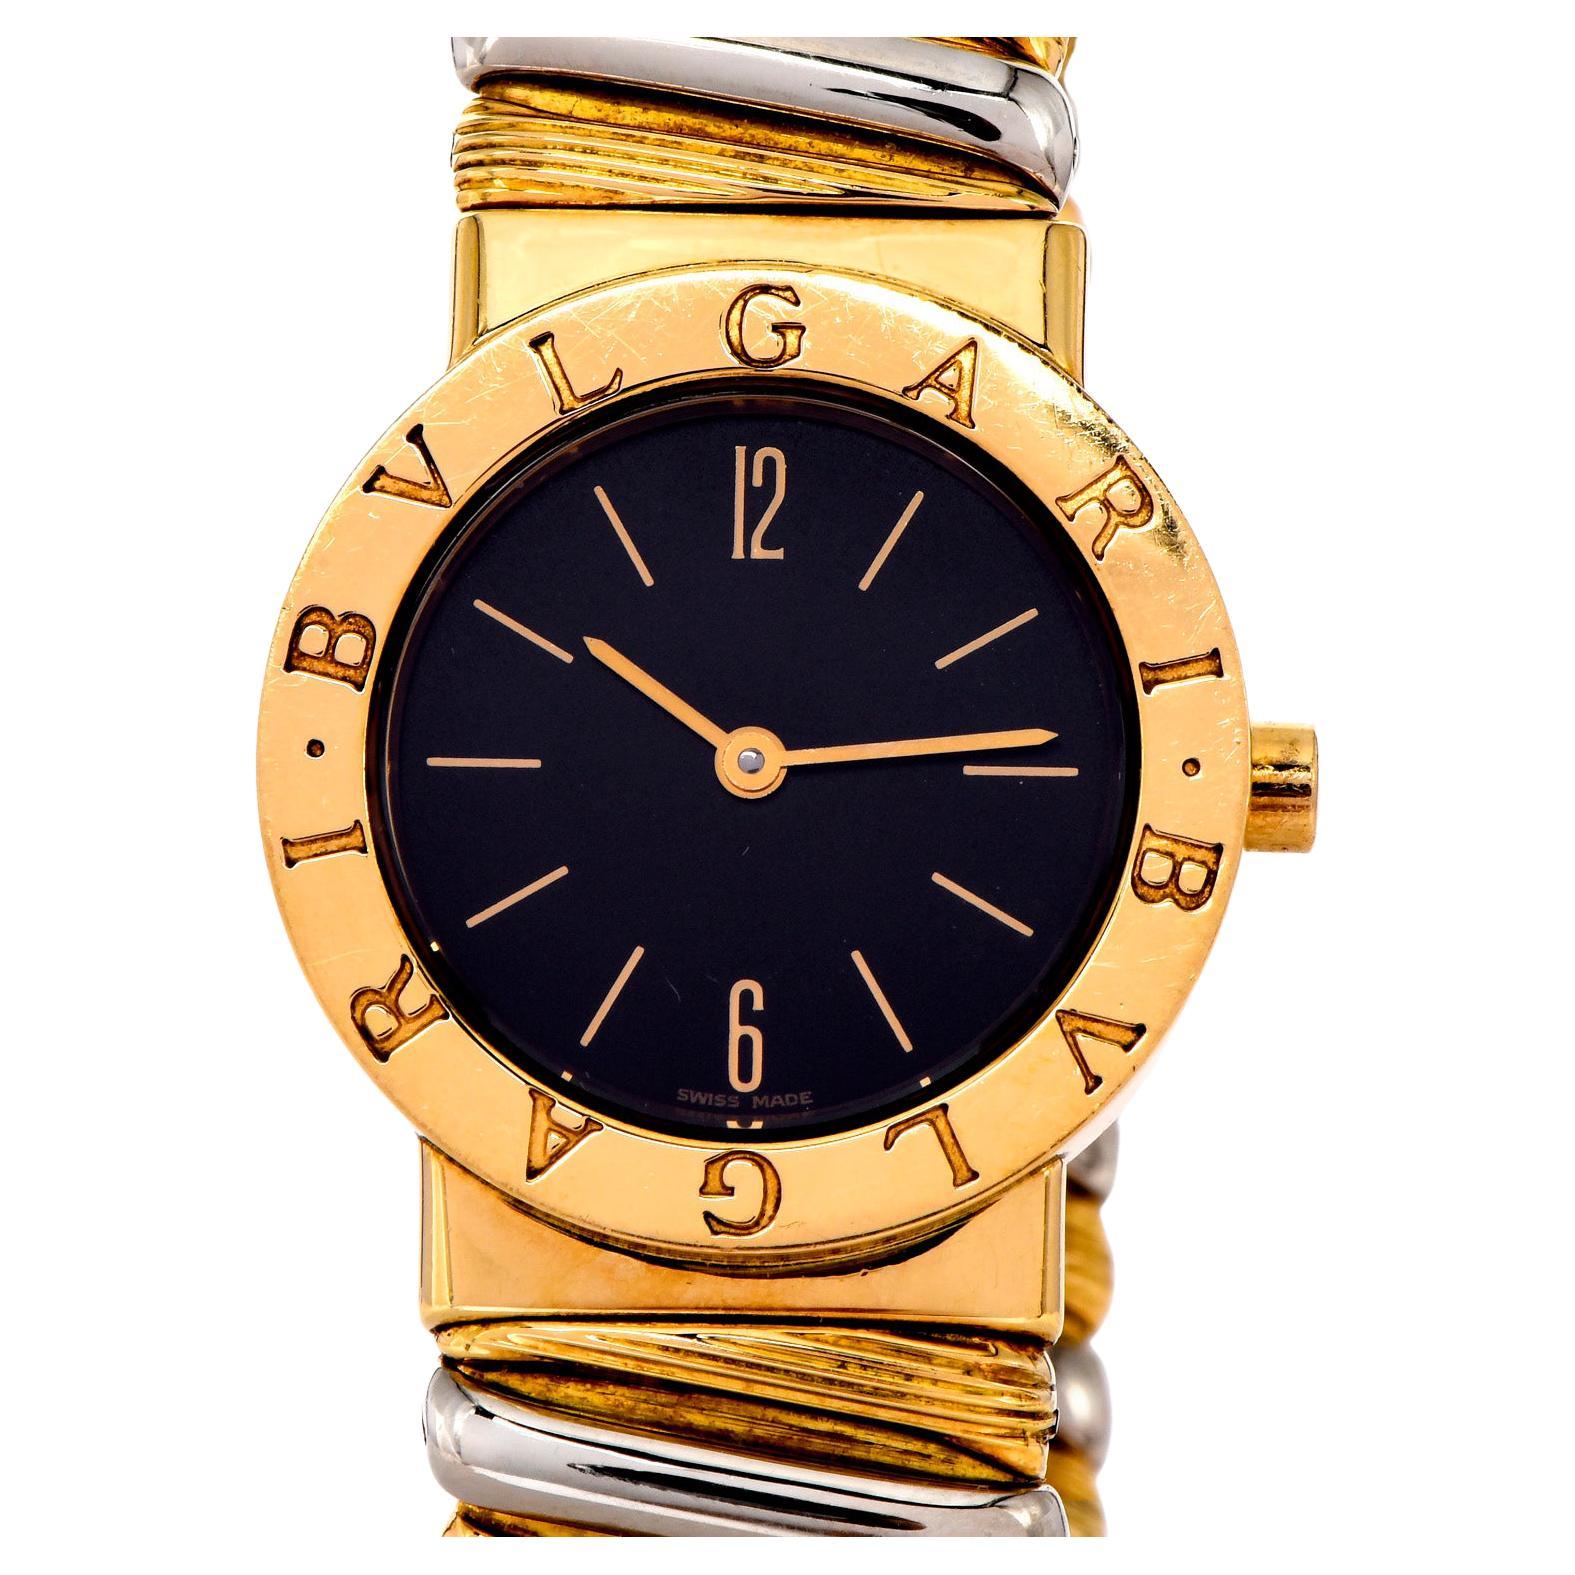 Mid-Size Vintage Ladies Bvlgari Bulgari Tubogas watch in 18k yellow & white gold, a timeless highly desired masterpiece, perfect for everyday wear.
It has a beautiful black dial with gold numeral markers. Watch, dial, case, band, all signed